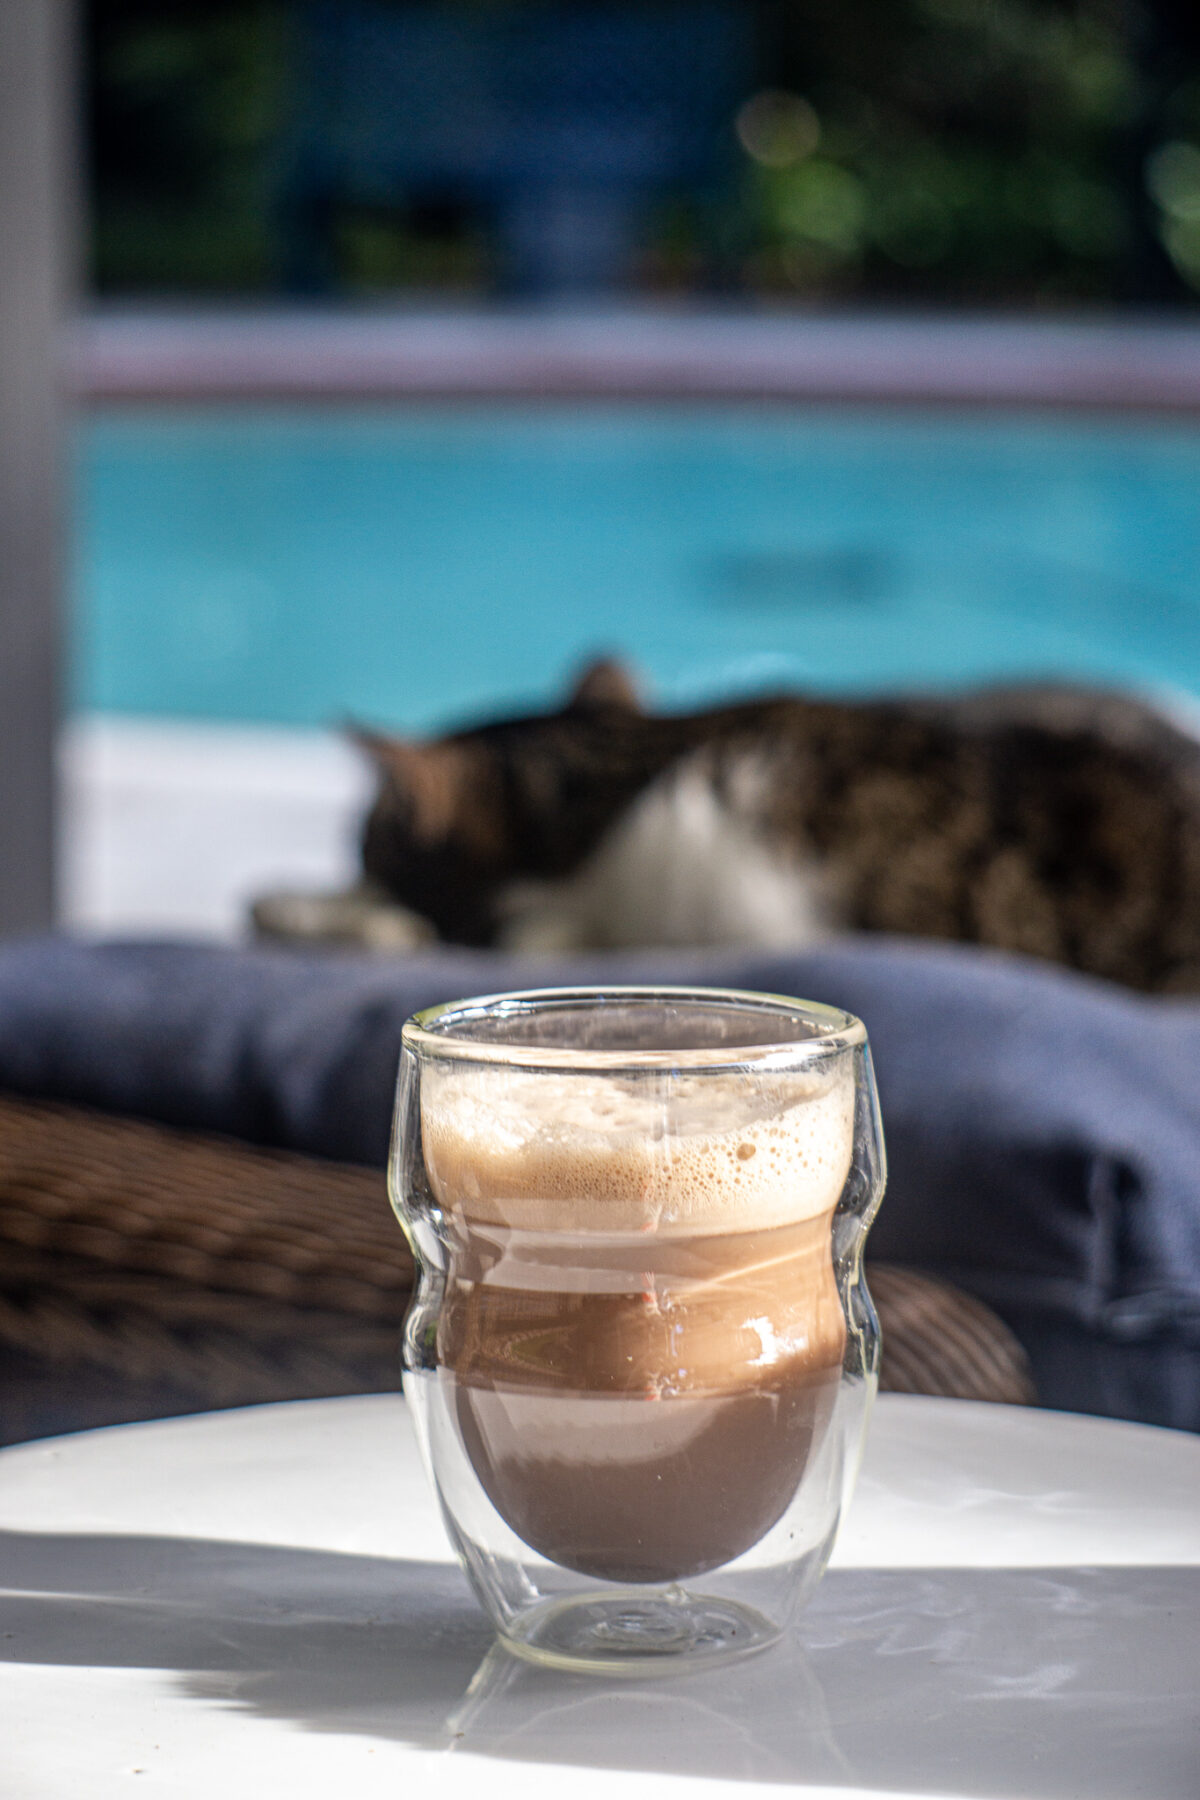 cacao latte in front of sleeping cat